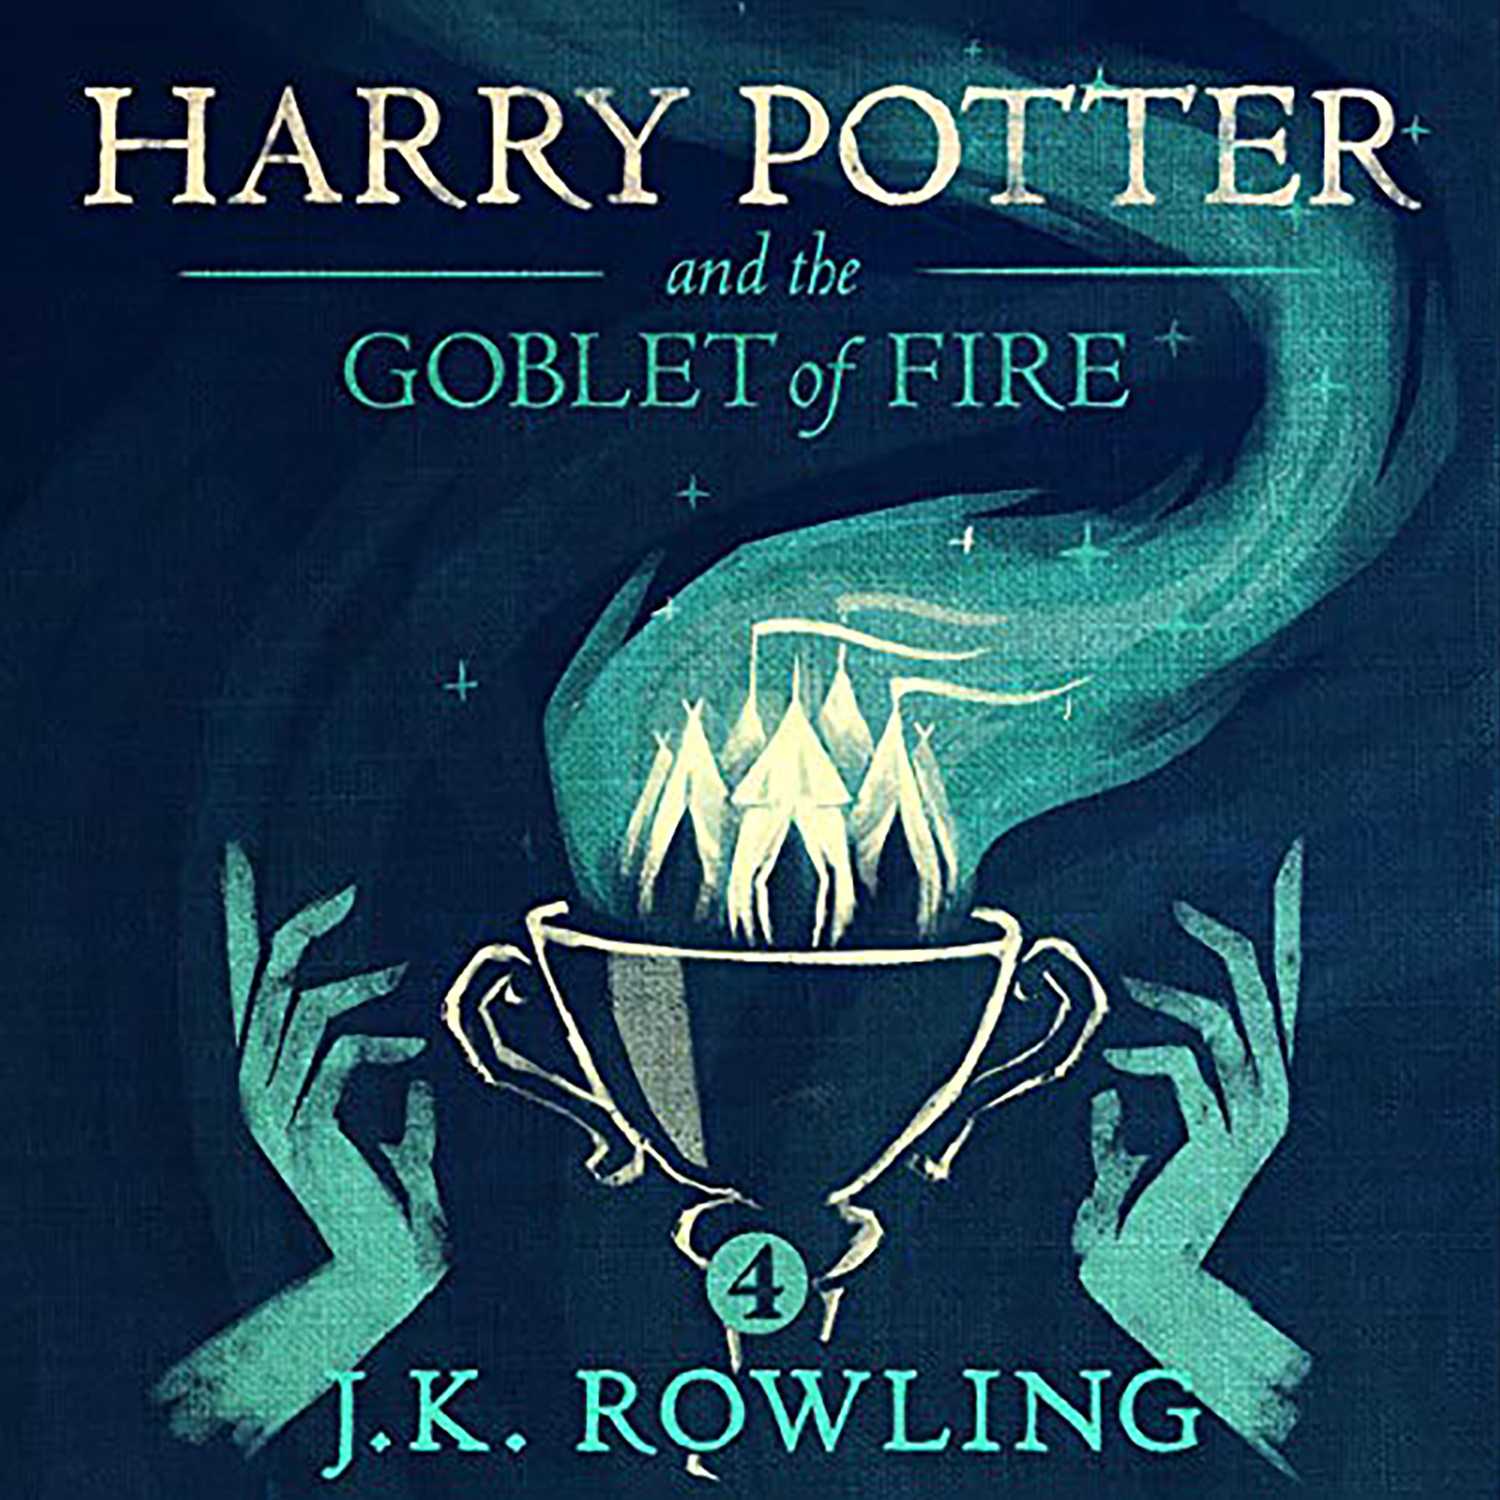 Harry Potter and the Goblet of Fire Part 2